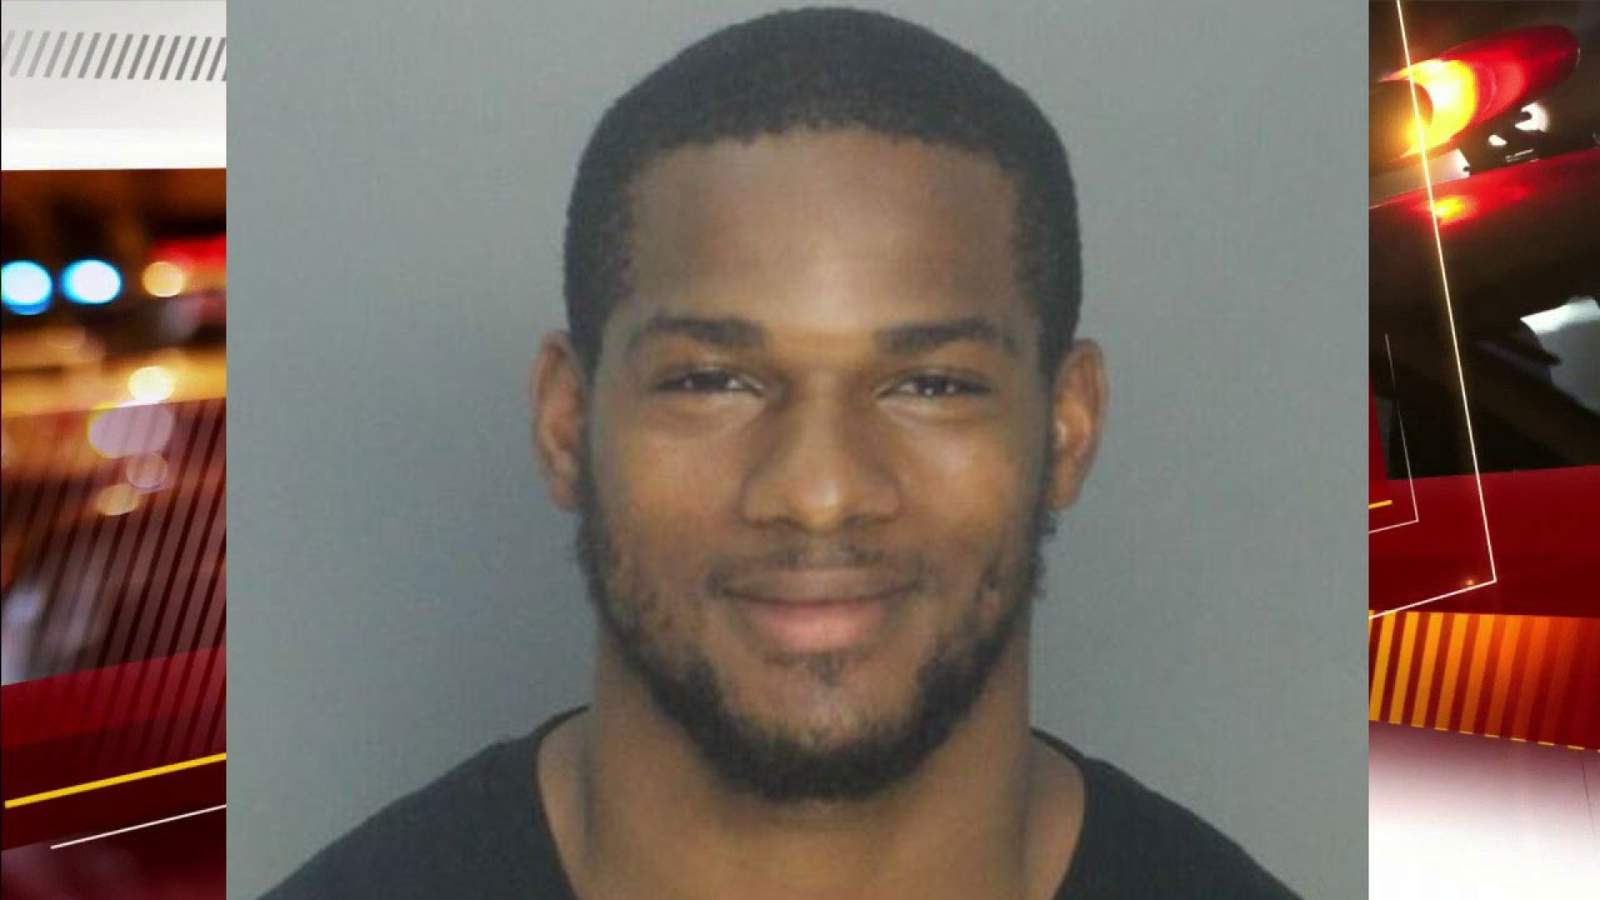 Former Miami Dolphins player gets arrested after fit of rage over Pizza Hut service